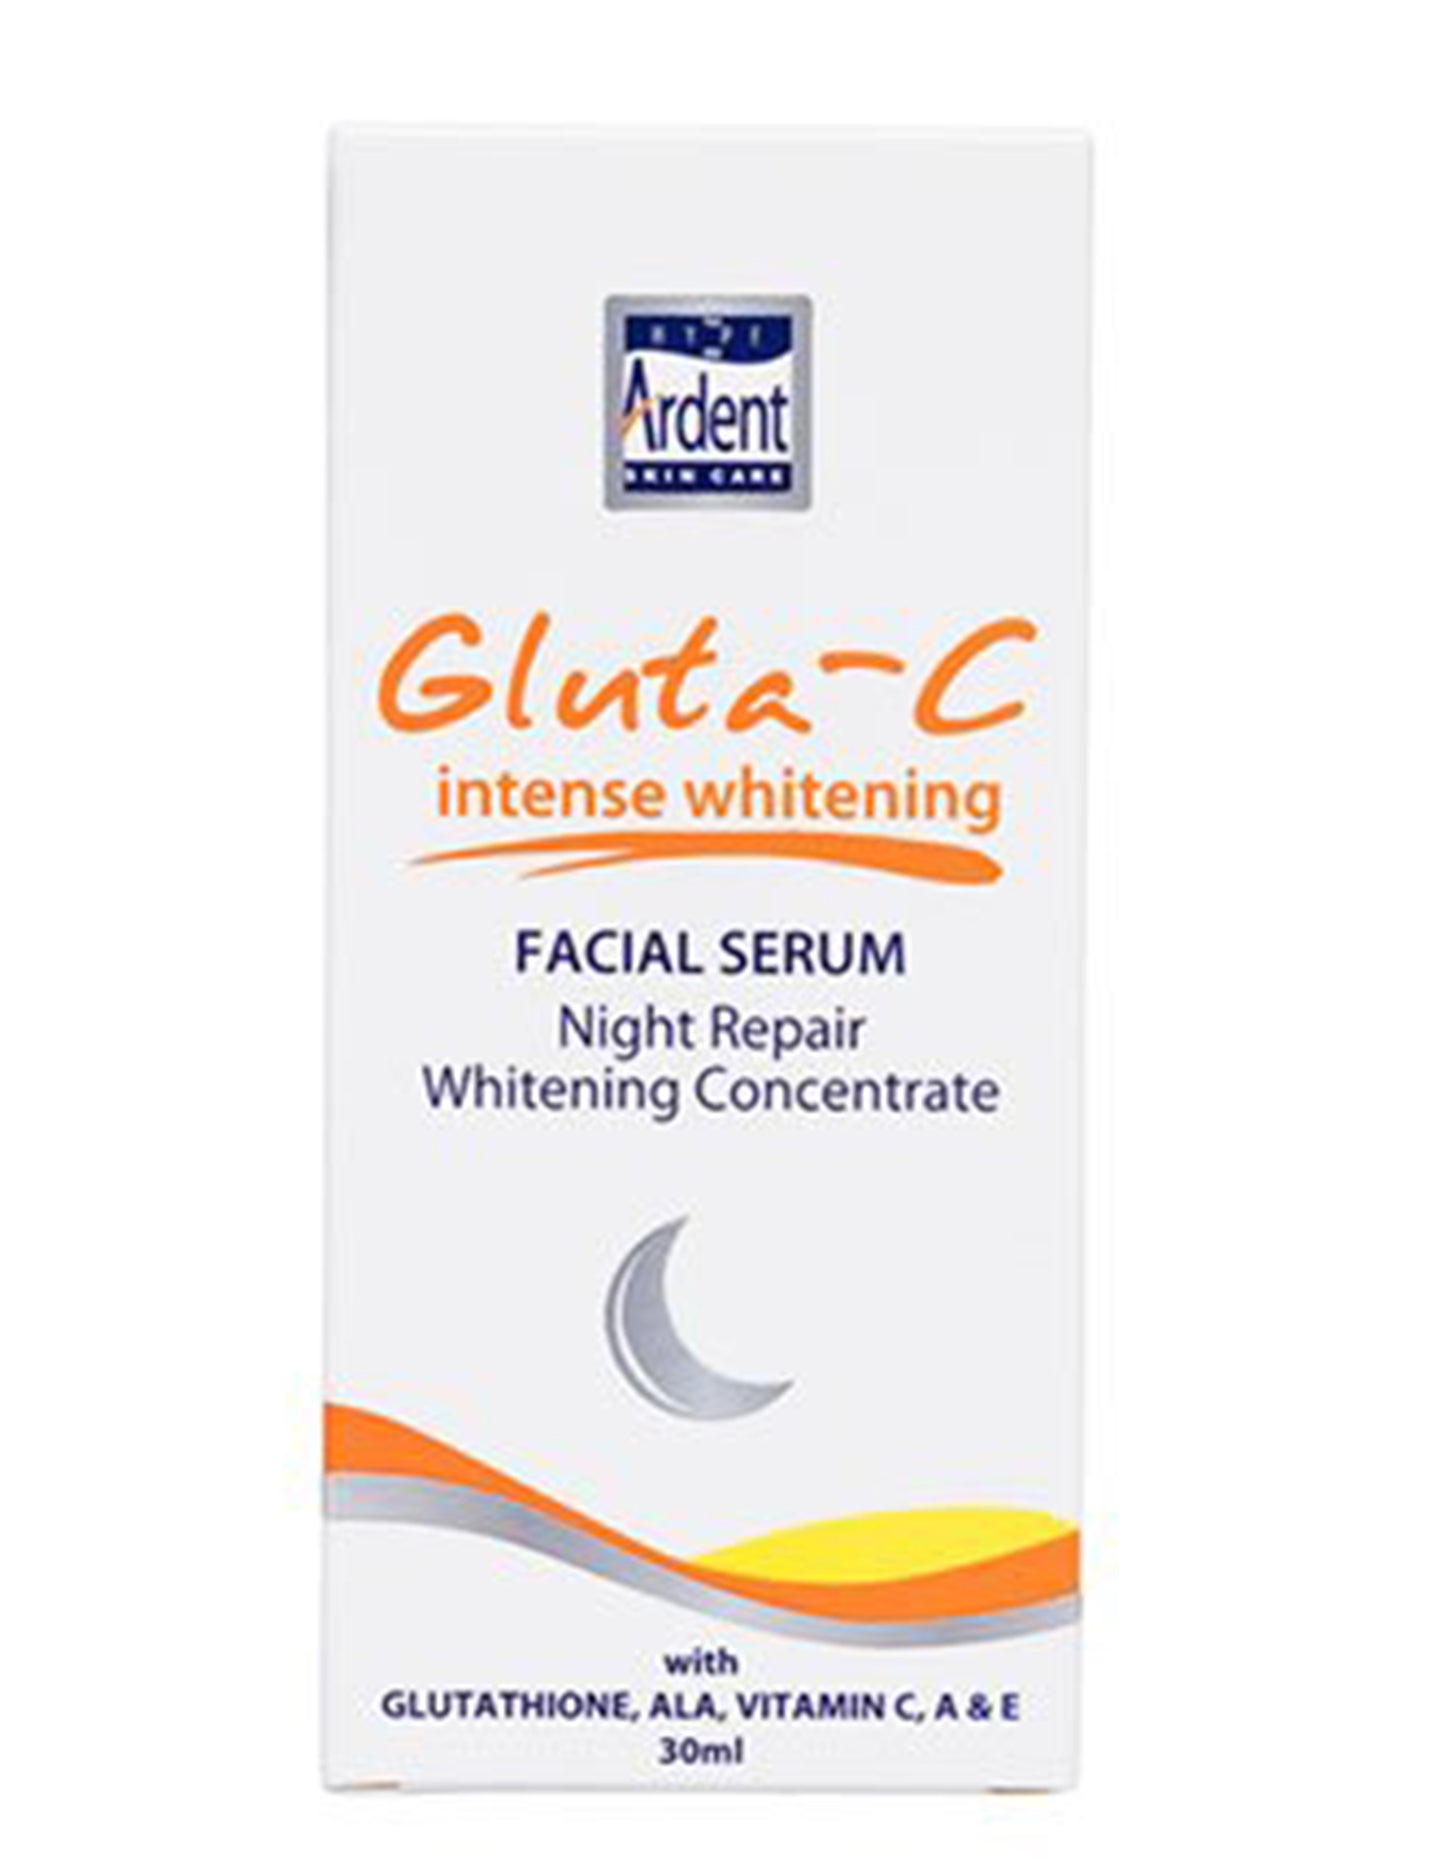 GlutaC intense whitening Facial Serum Night Repair Whitening Concentrate 30ml Value Pack of 3 